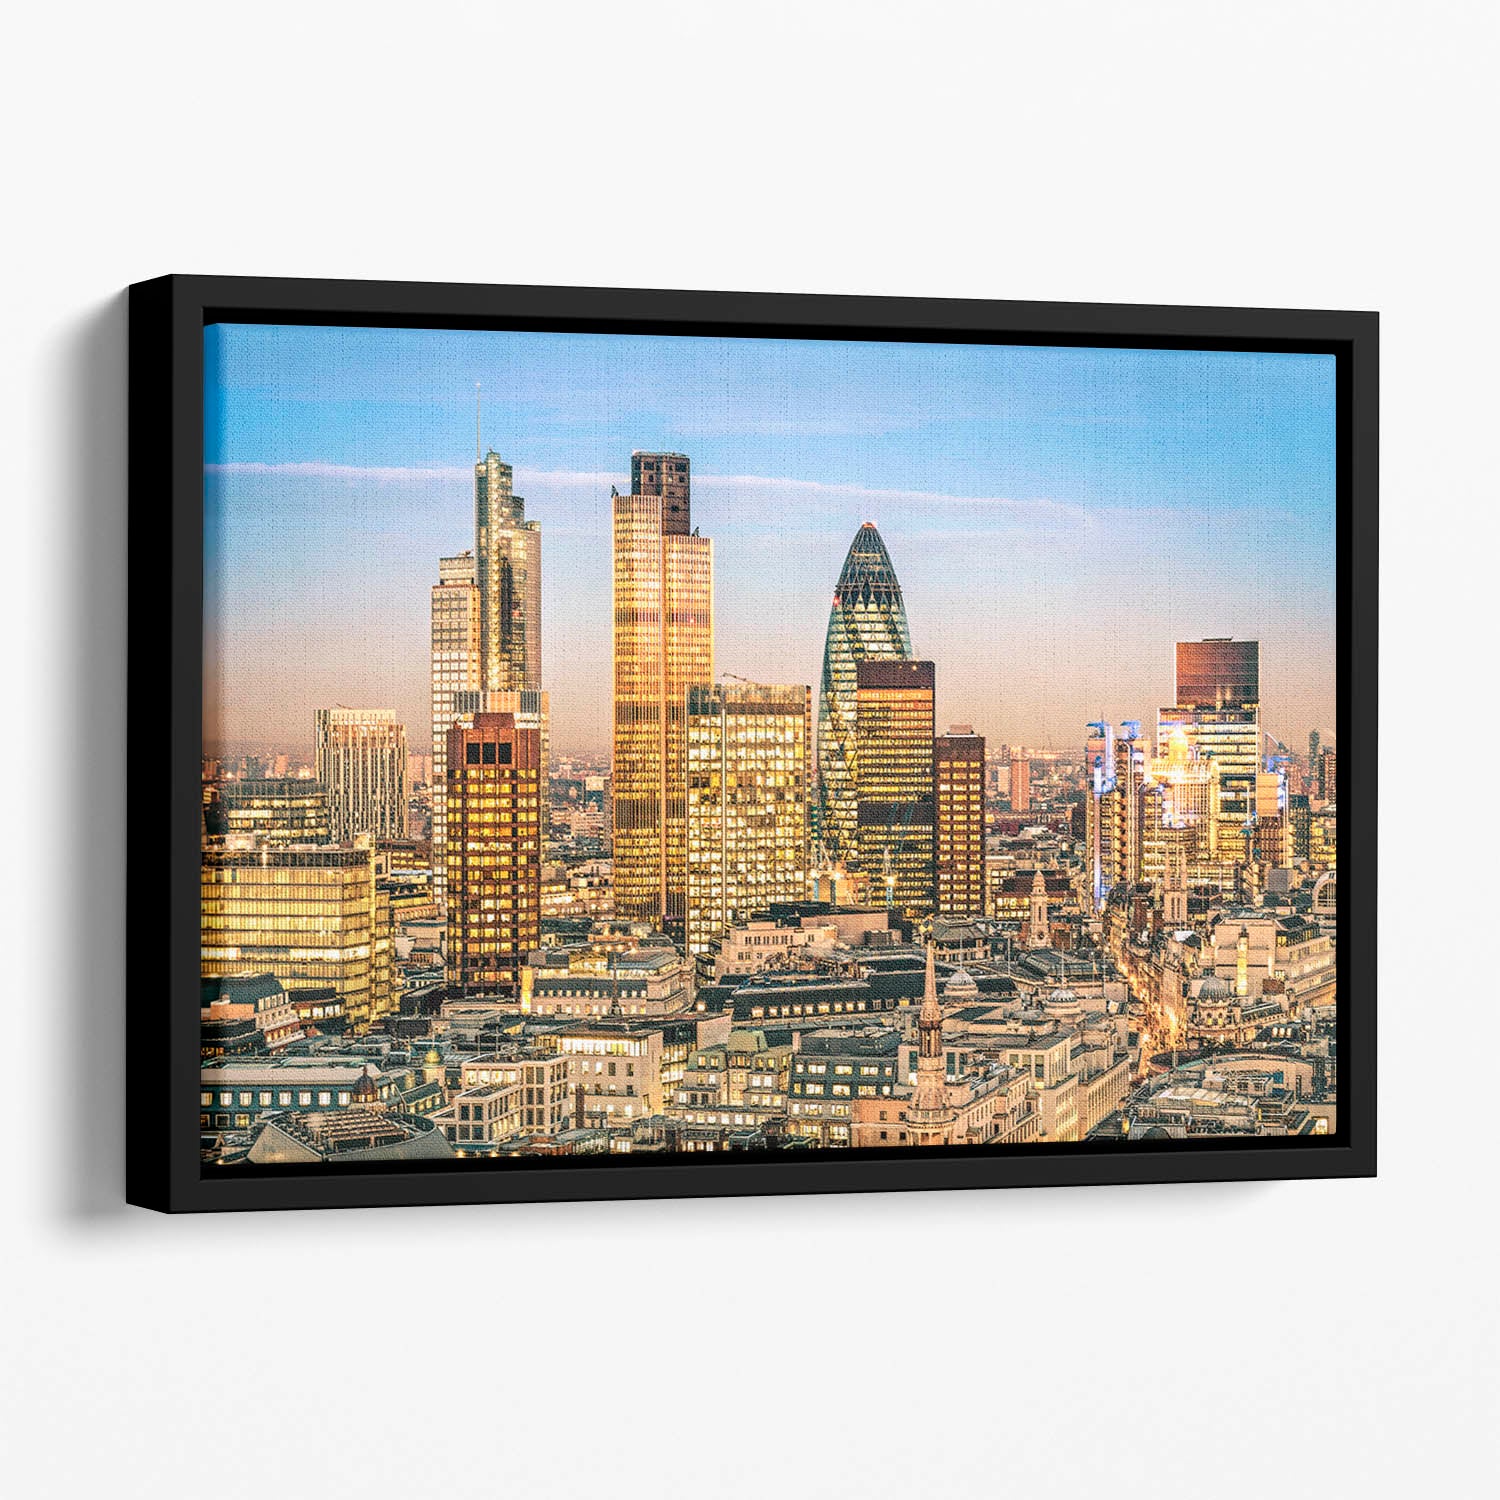 Stock Exchange Tower and Lloyds of London Floating Framed Canvas